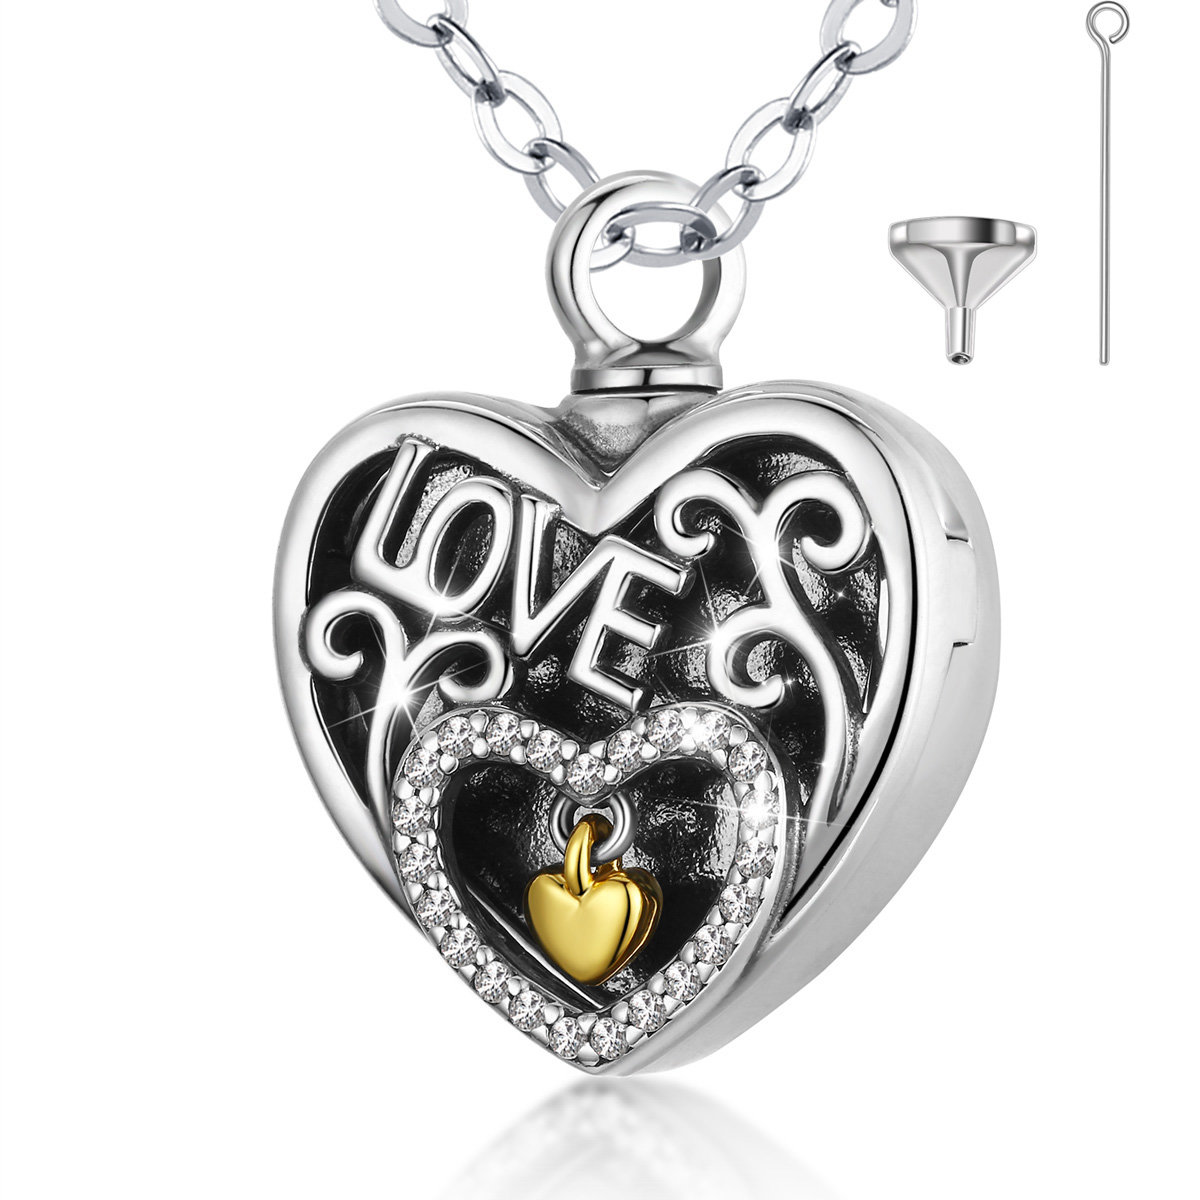 Merryshine Cremation Jewelry Forever in my heart cremation necklace 925 Sterling Silver picture big heart locket urn necklace